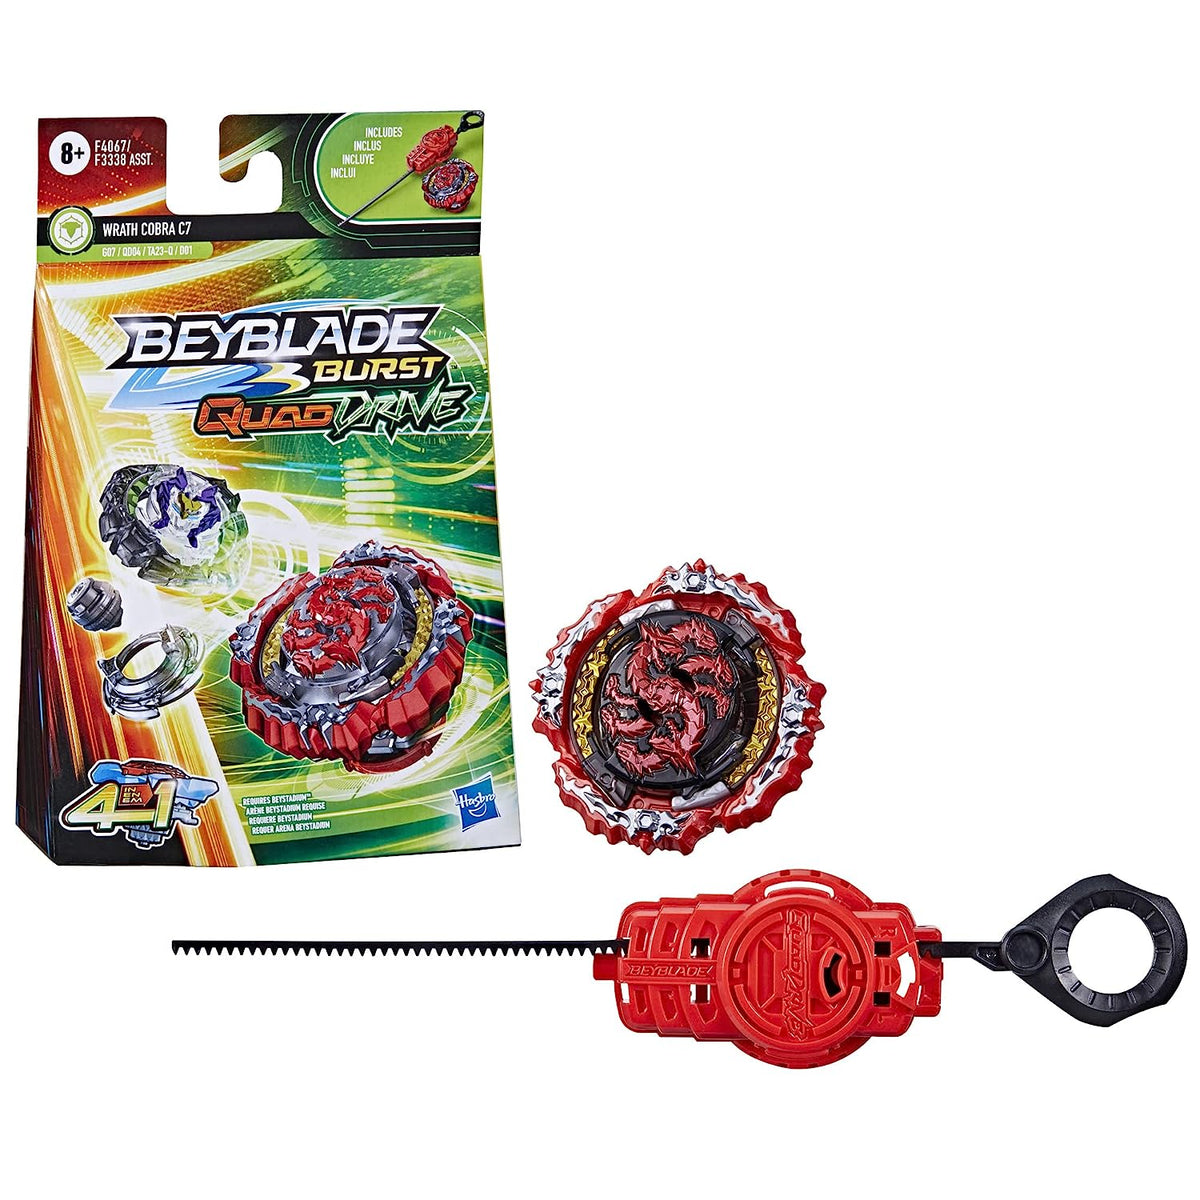 Beyblade Burst QuadDrive Wrath Cobra C7 with Launcher Spinning Top for Kids Ages 8 and Up